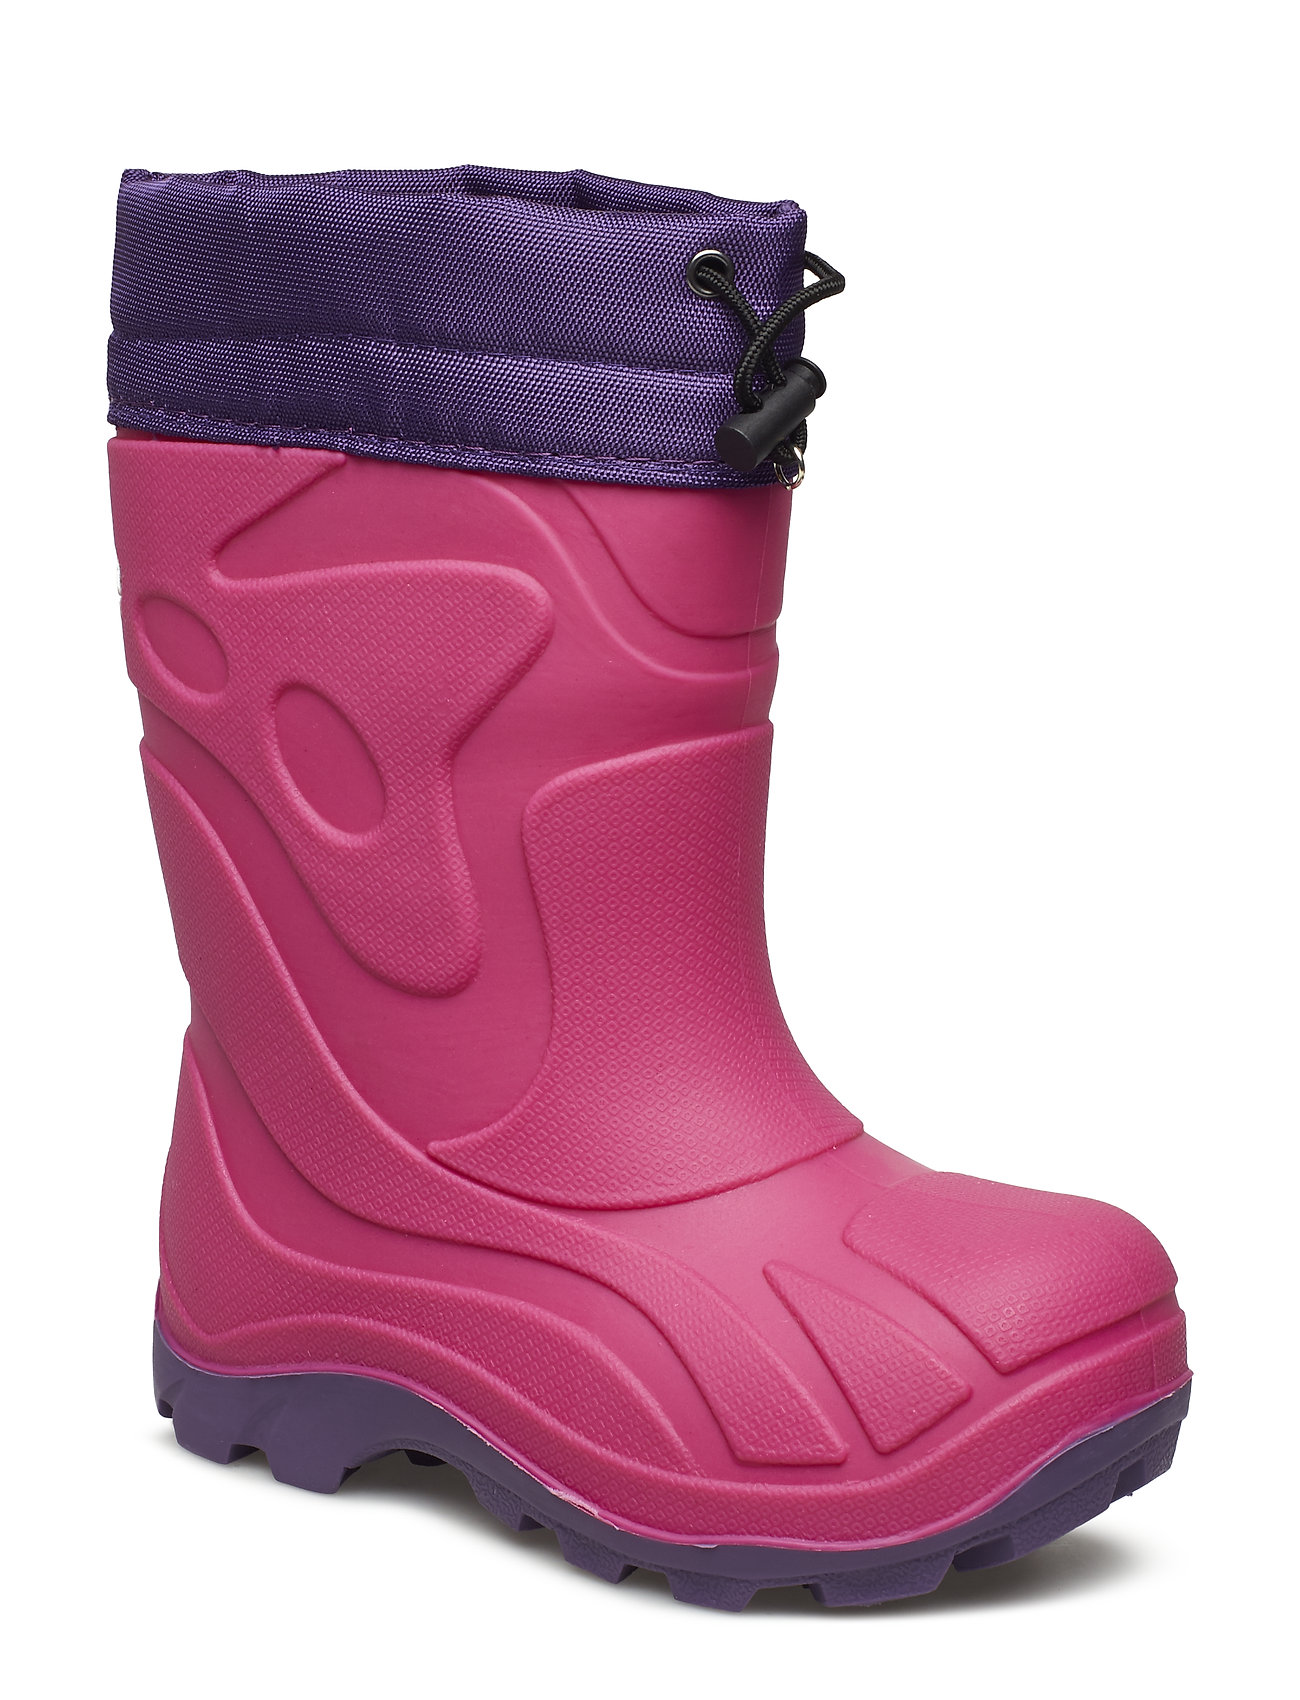 Boots Shoes Winter Boots Lined Rubberboots Vaaleanpunainen Gulliver